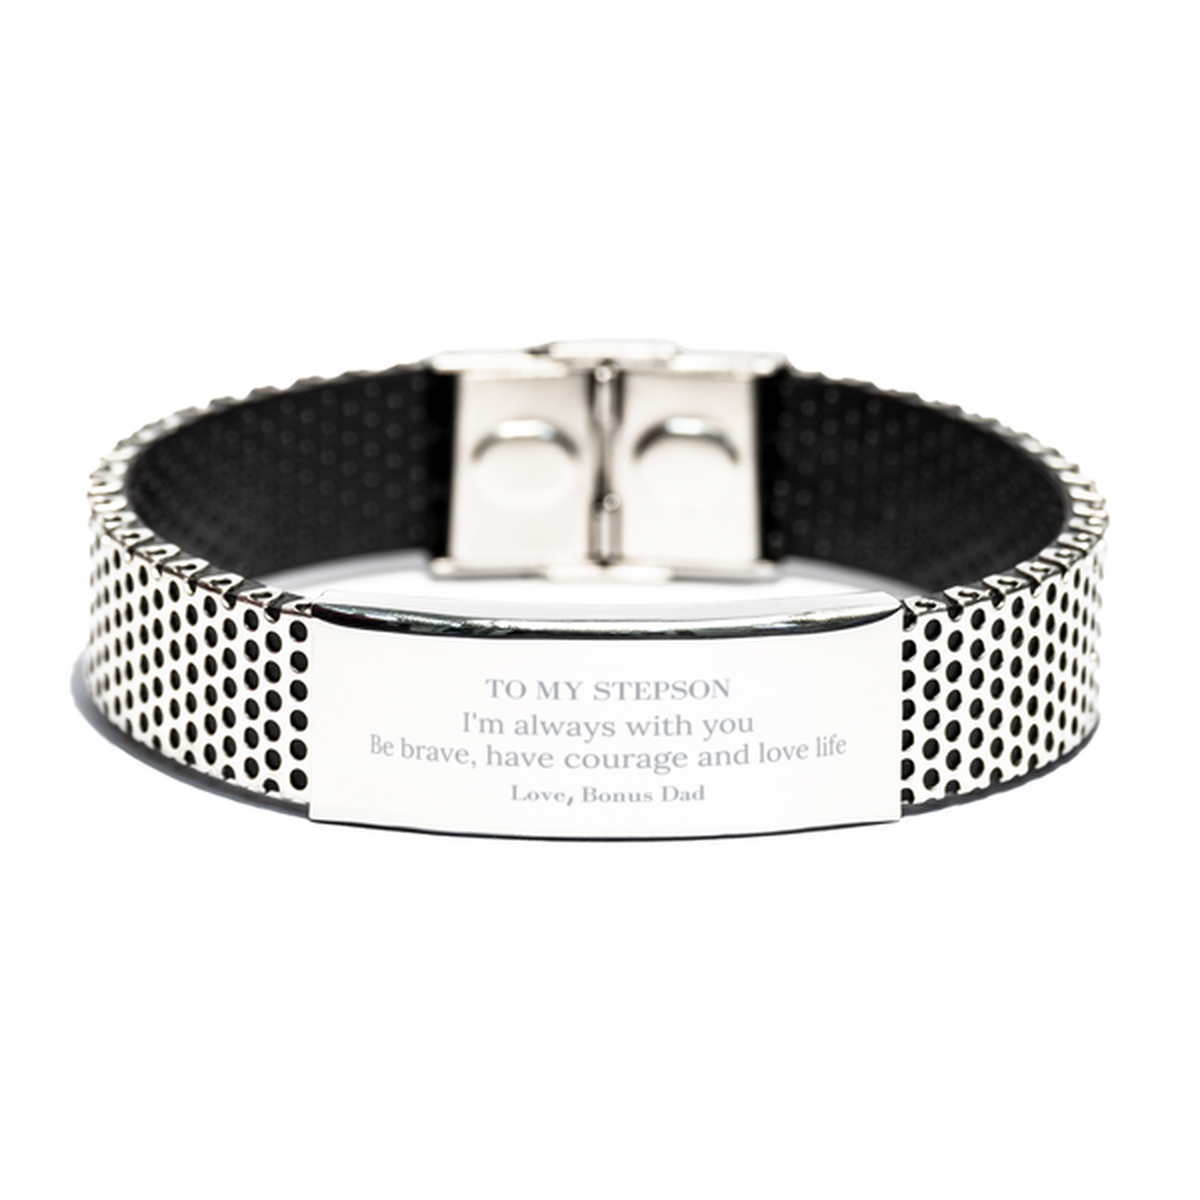 To My Stepson Gifts from Bonus Dad, Unique Stainless Steel Bracelet Inspirational Christmas Birthday Graduation Gifts for Stepson I'm always with you. Be brave, have courage and love life. Love, Bonus Dad